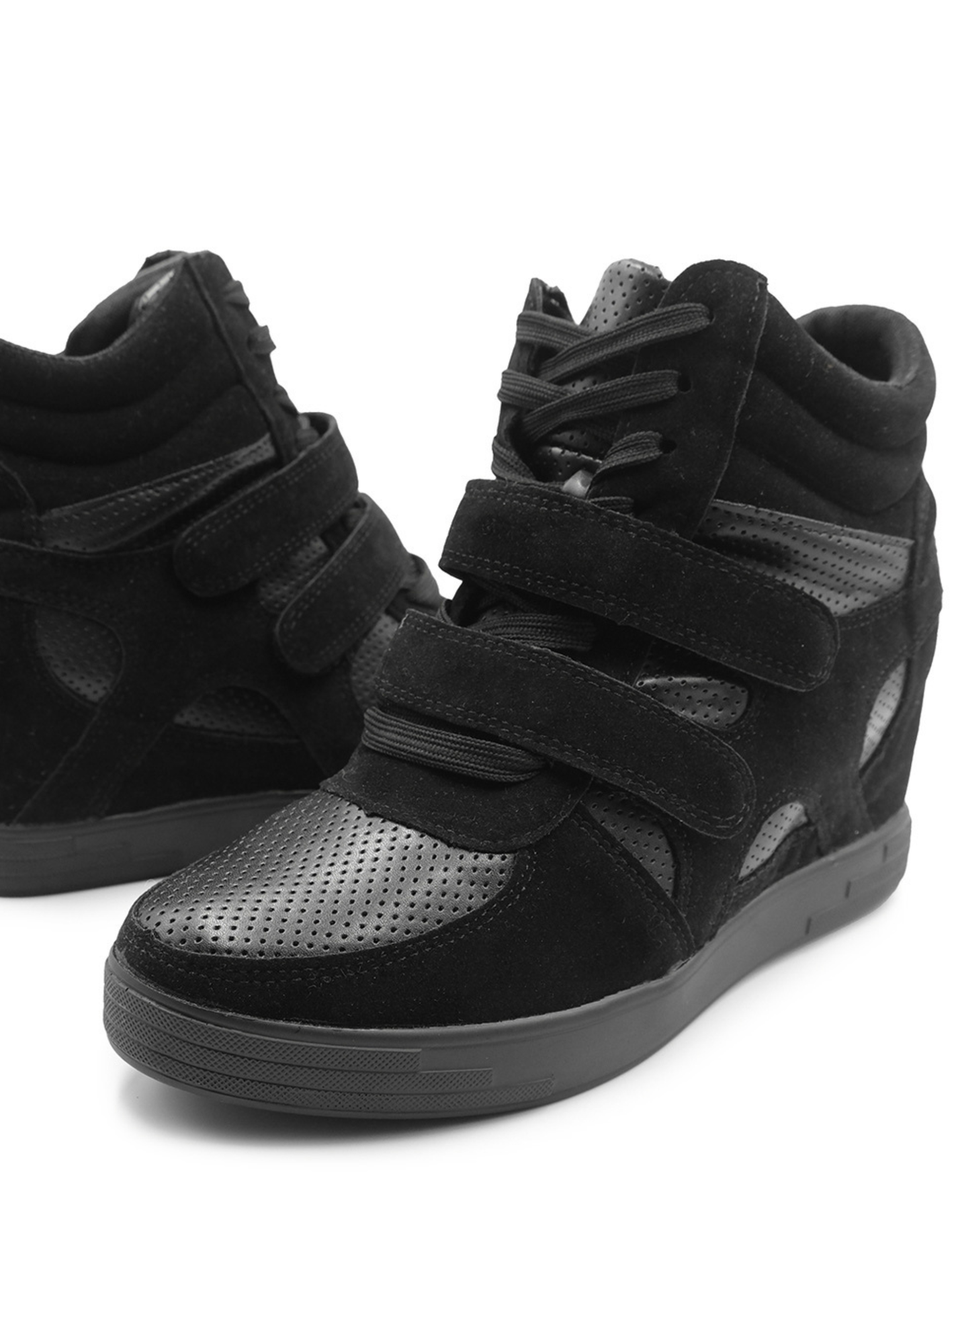 Where's That From Black Suede Hitop Wedge Trainers